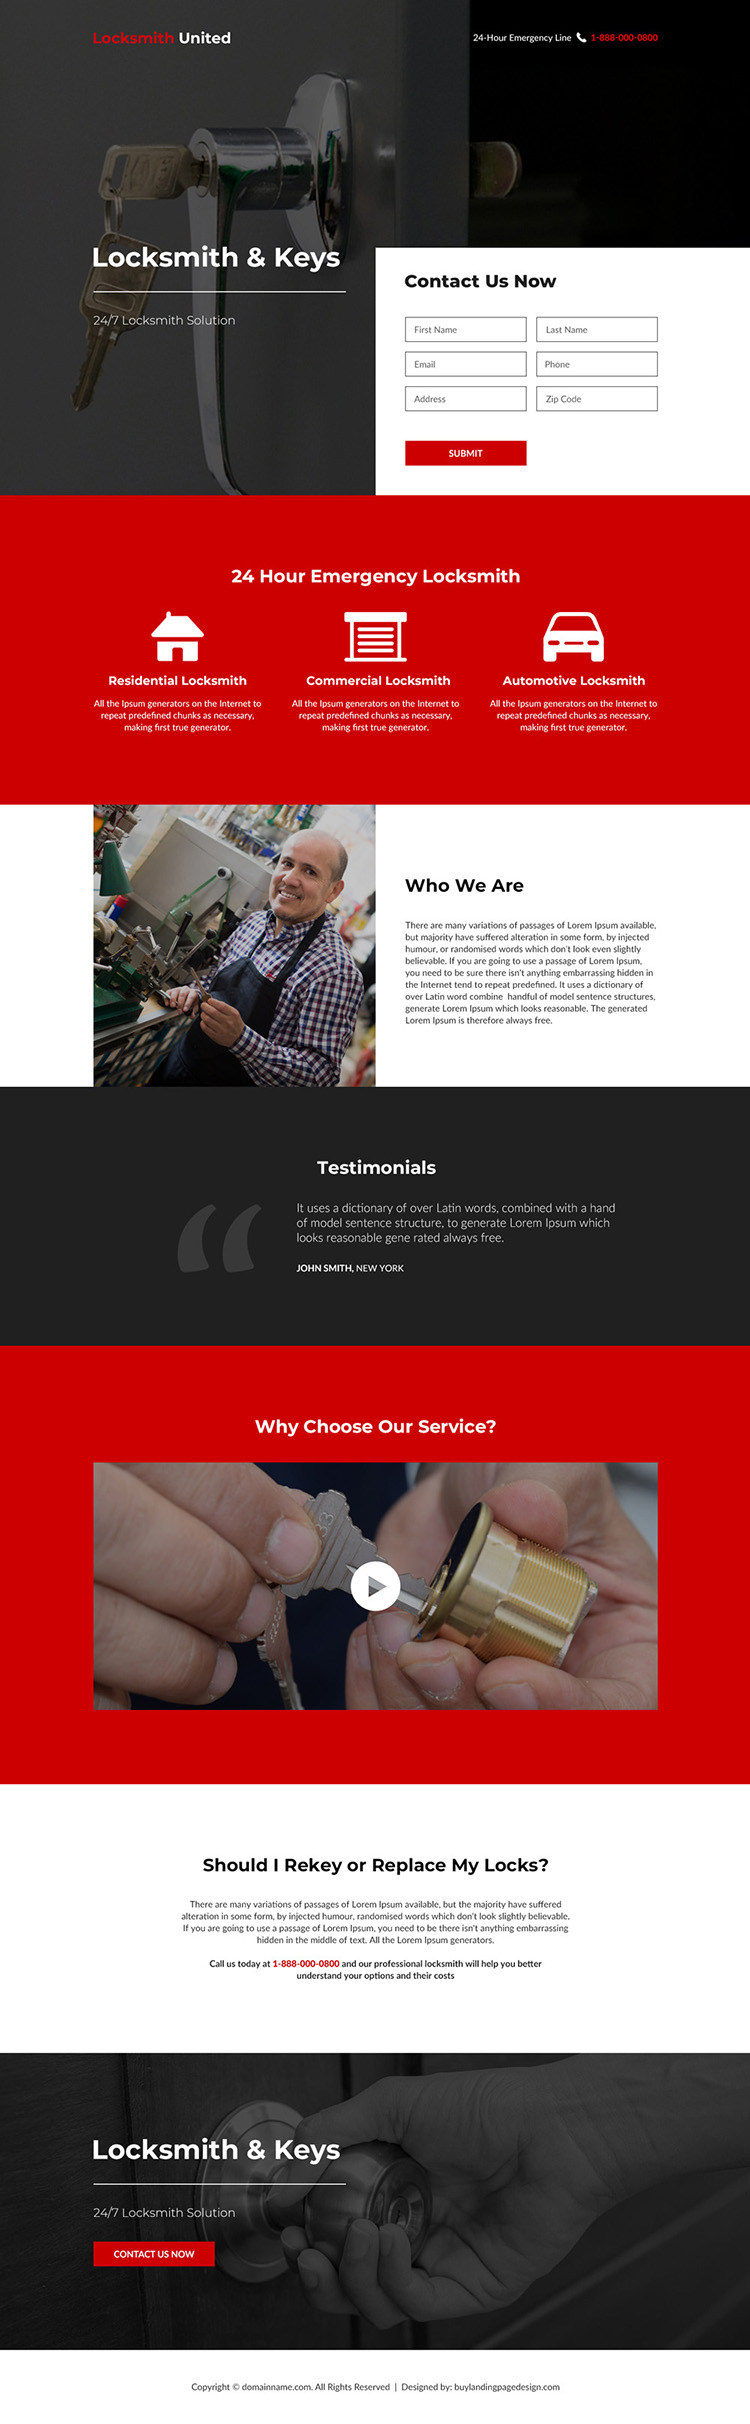 emergency locksmith and key services responsive landing page design